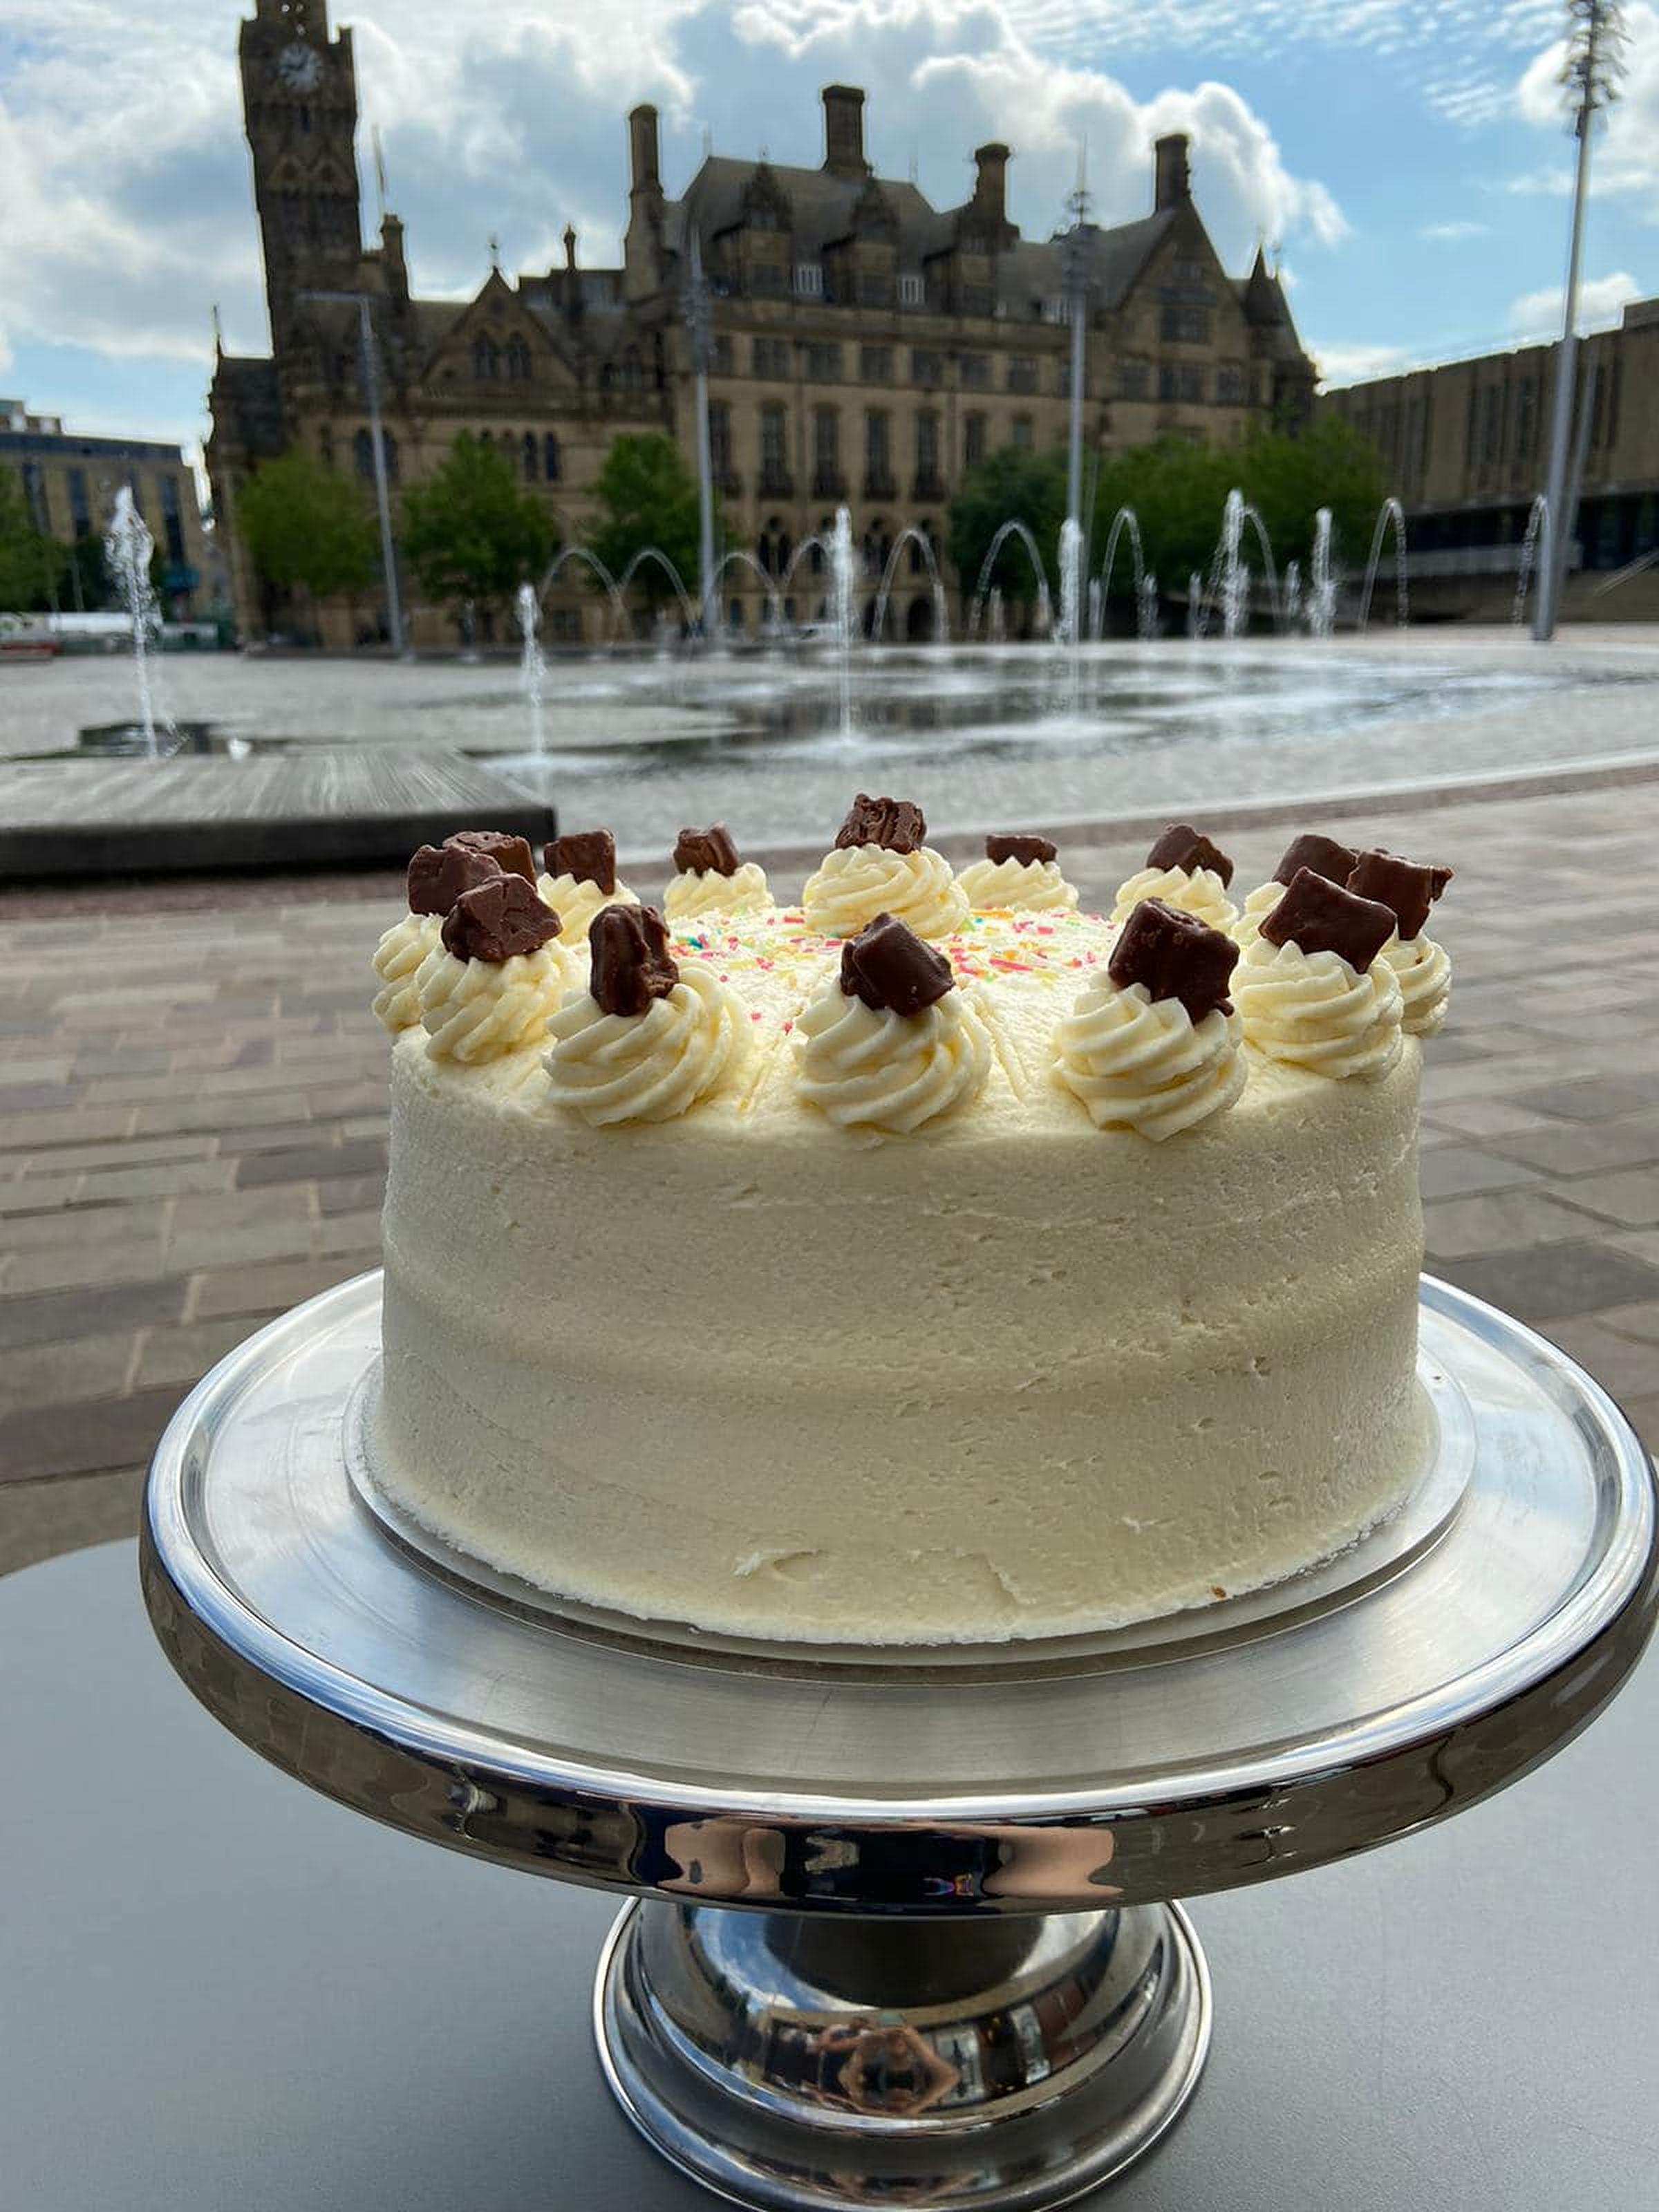 Iced cake with City Hall in the background